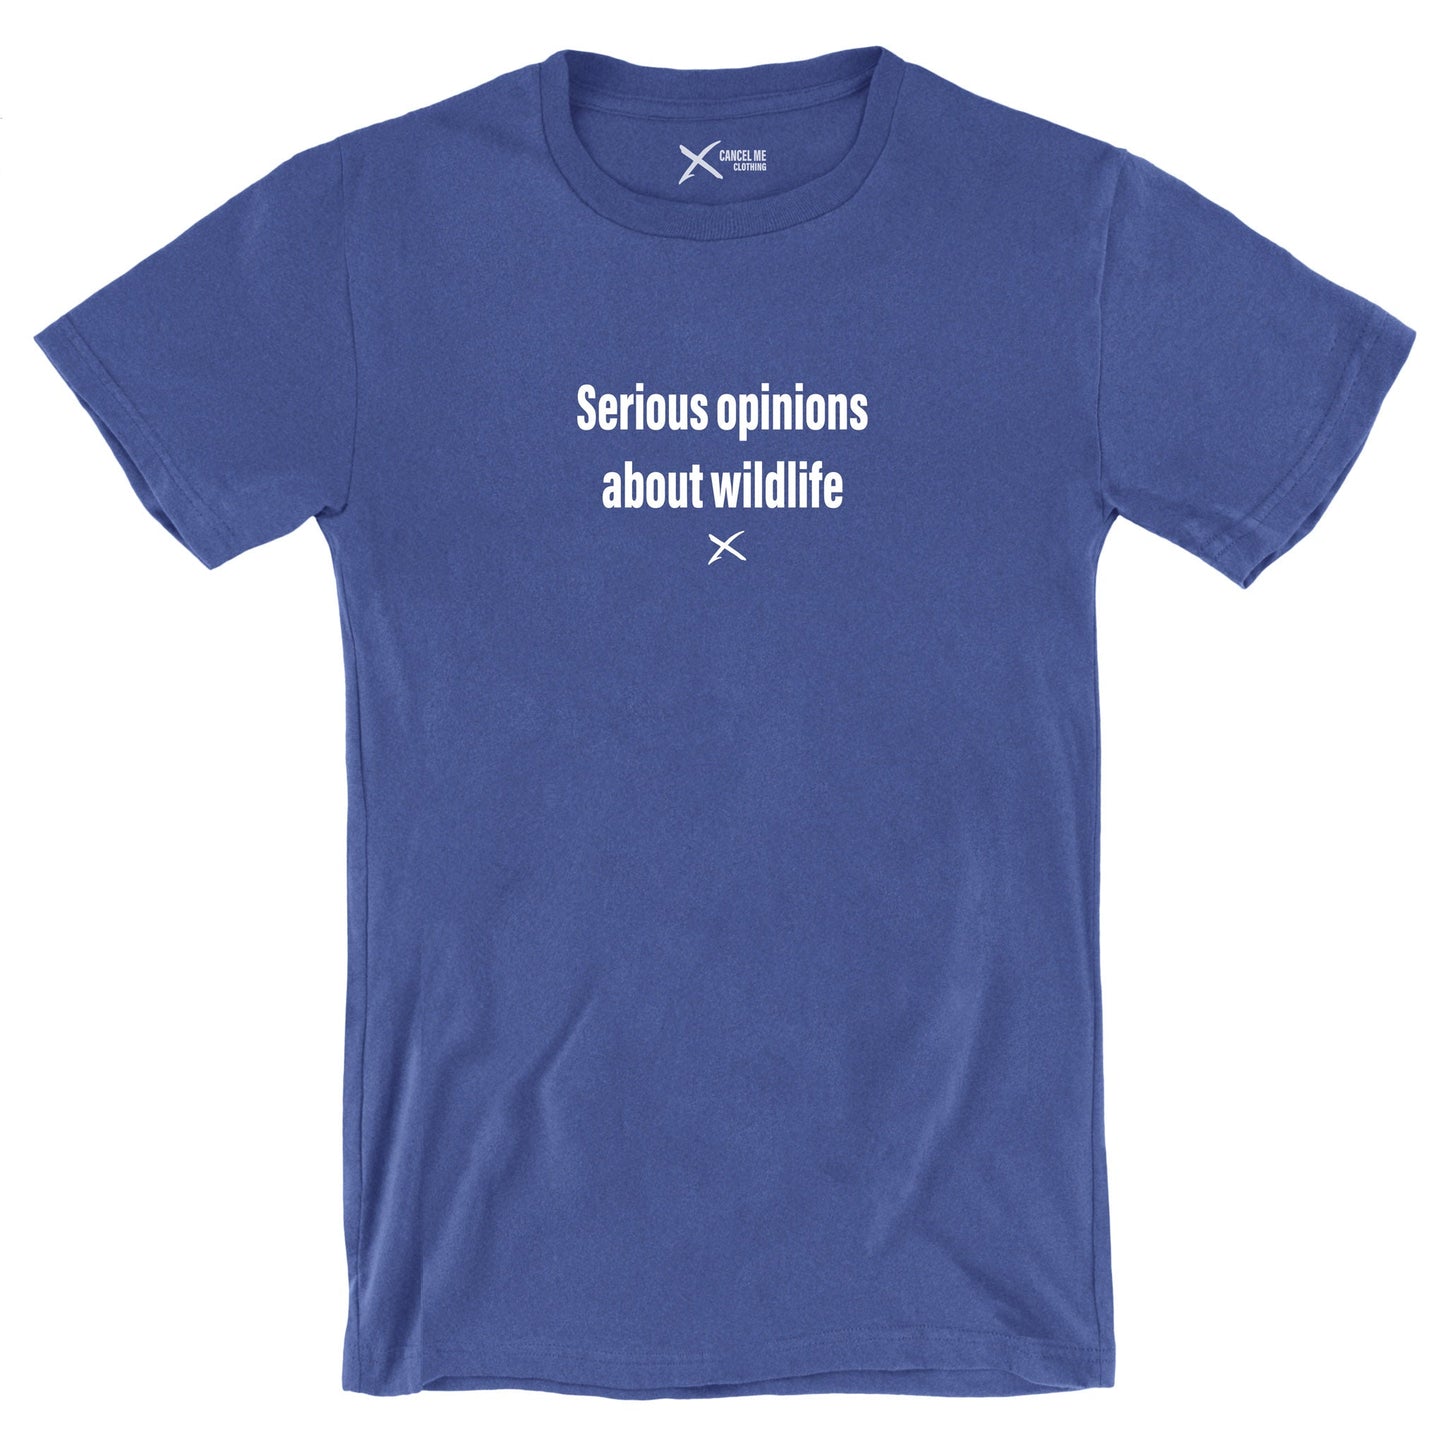 Serious opinions about wildlife - Shirt